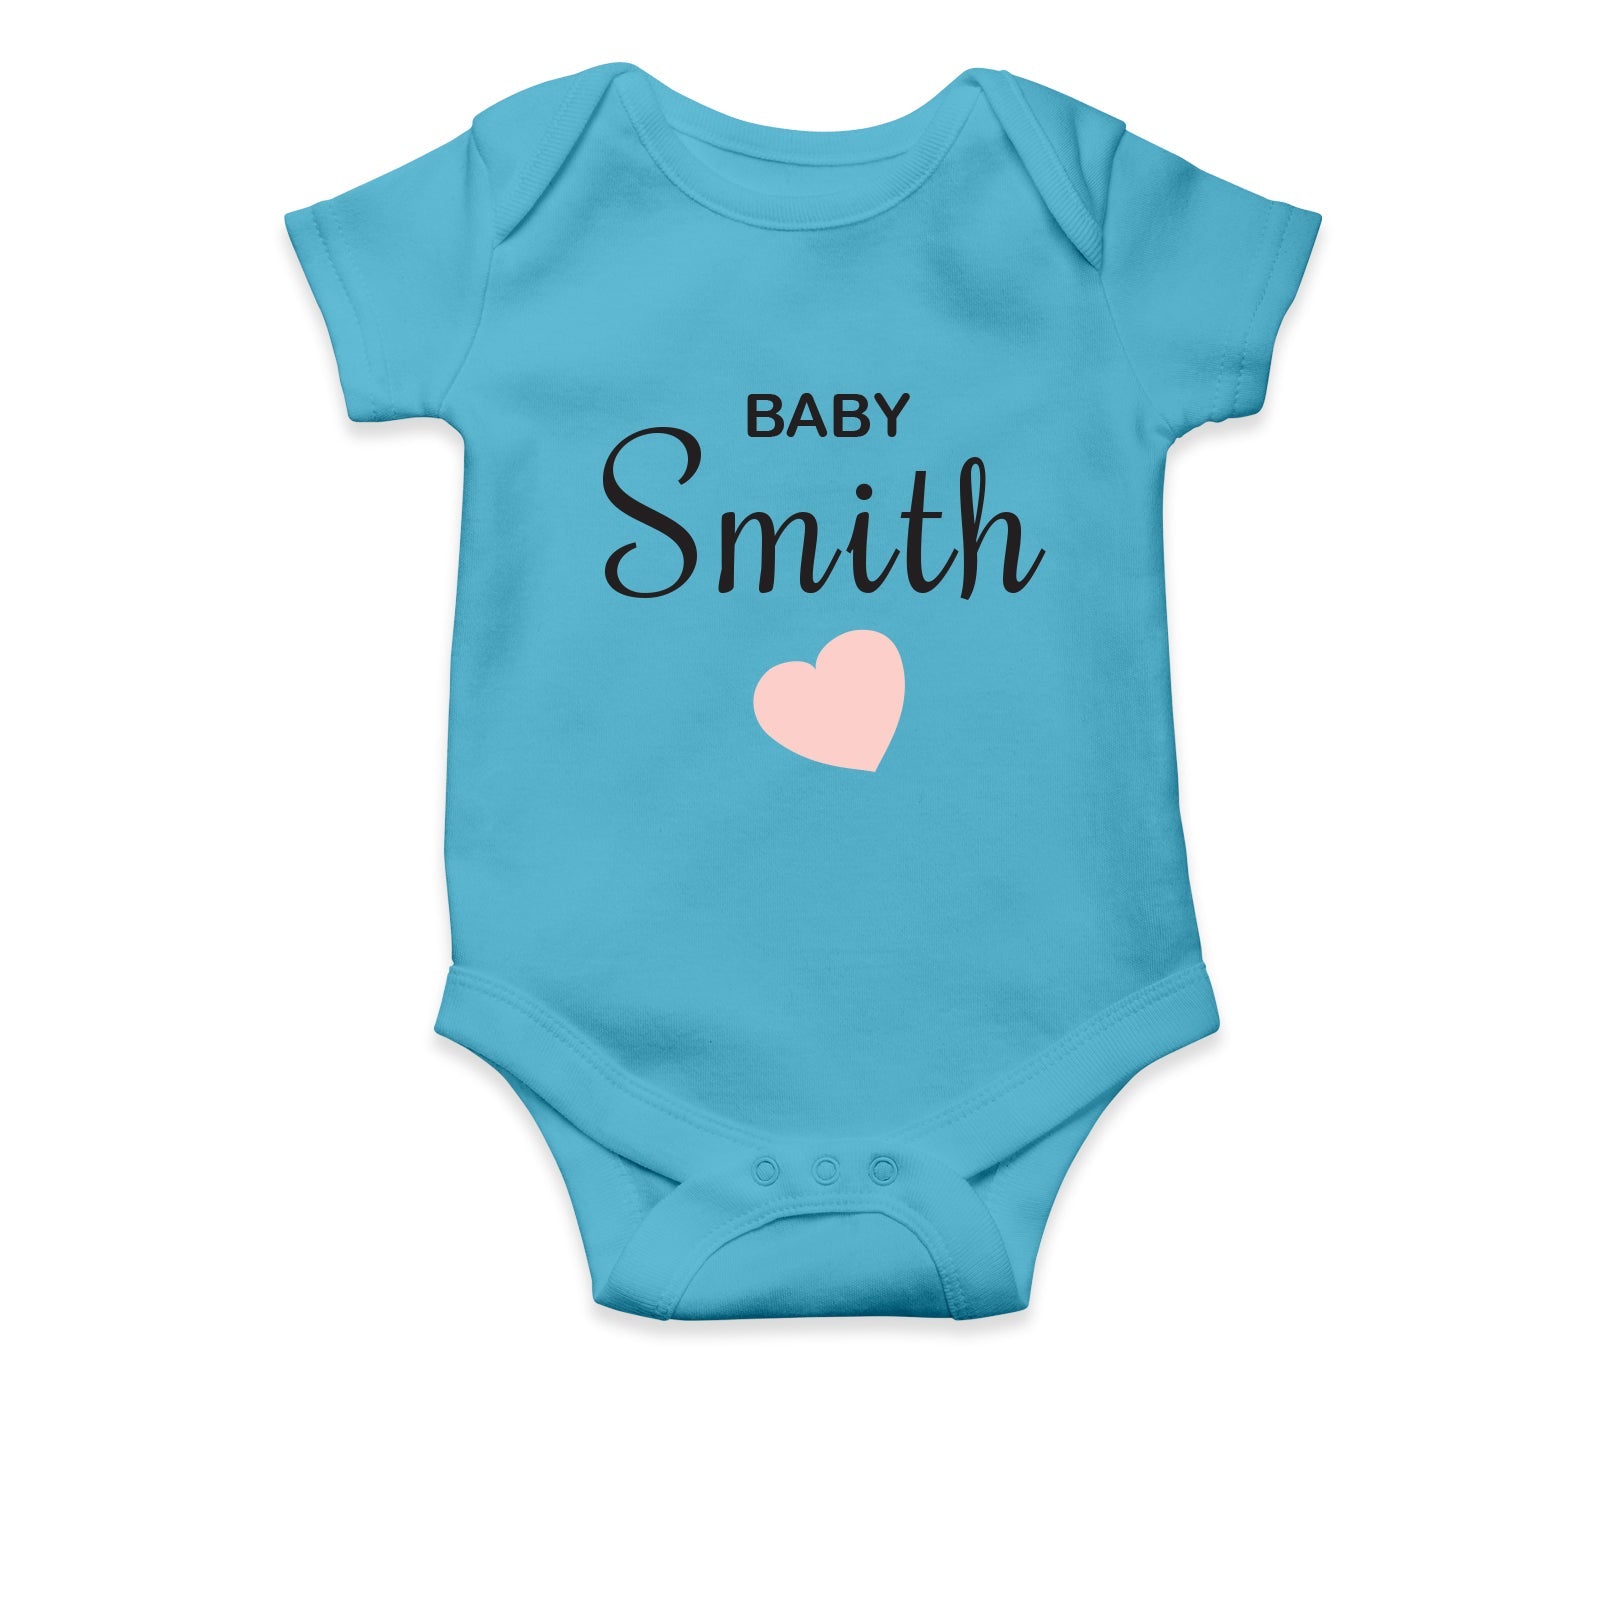 Personalised White Baby Body Suit Grow Vest - Pink Heart - Little One